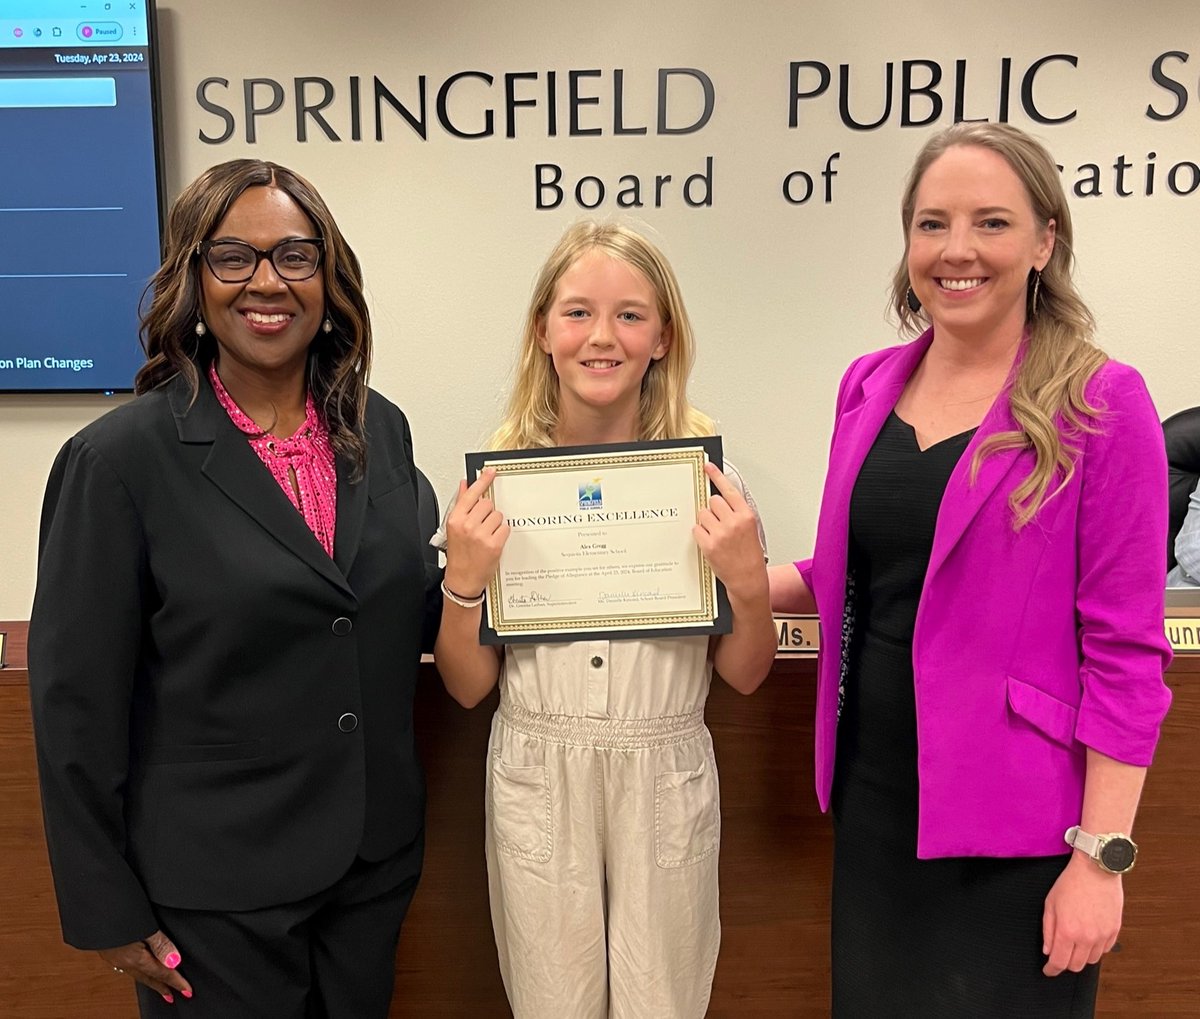 Reflecting her helpful spirit, @Sequiota fifth-grader Alex Gregg came to tonight's BOE meeting to lead the Pledge of Allegiance. She is an outstanding leader and learner.